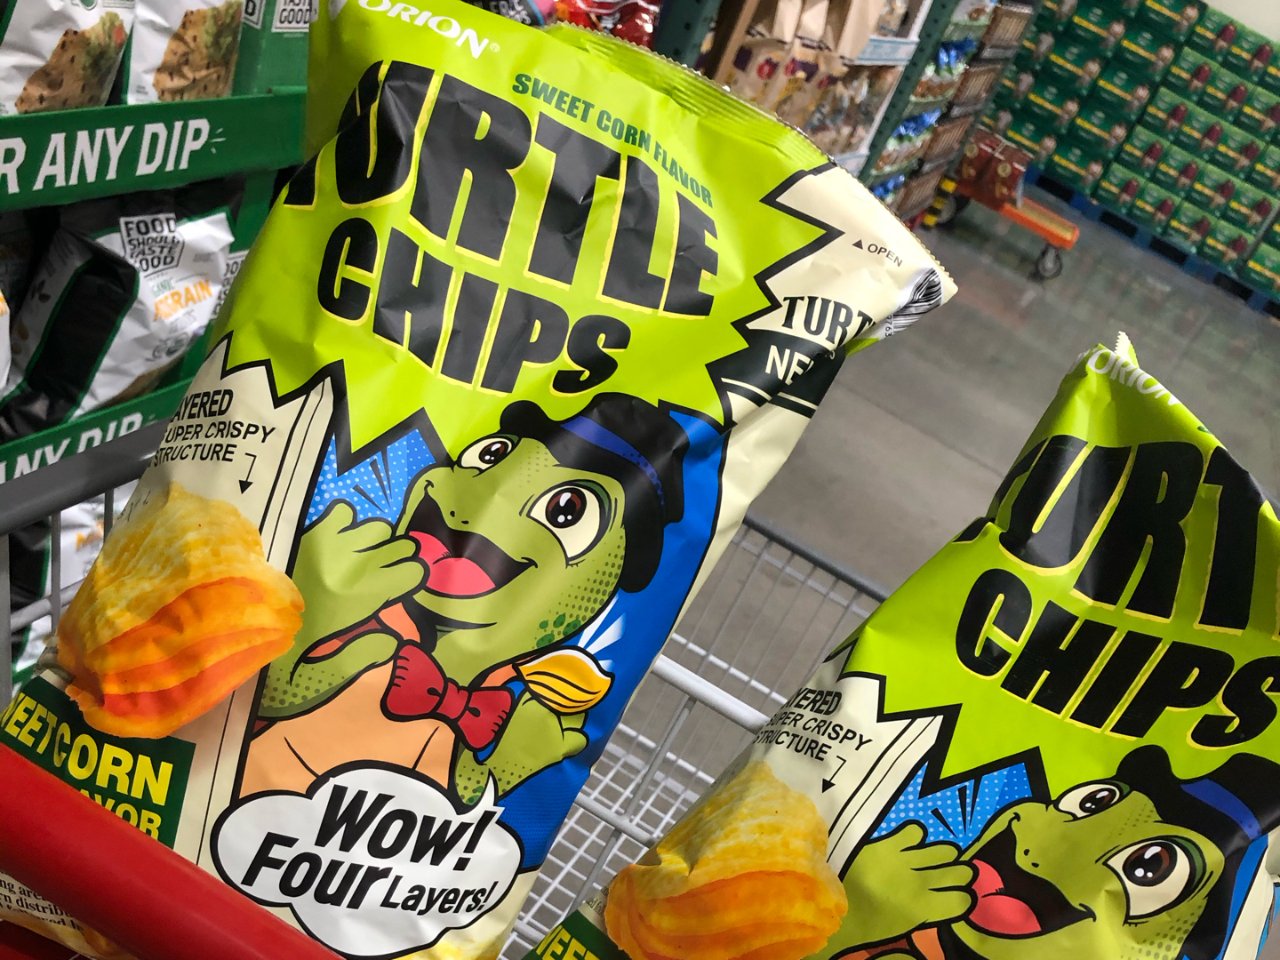 turtle chips